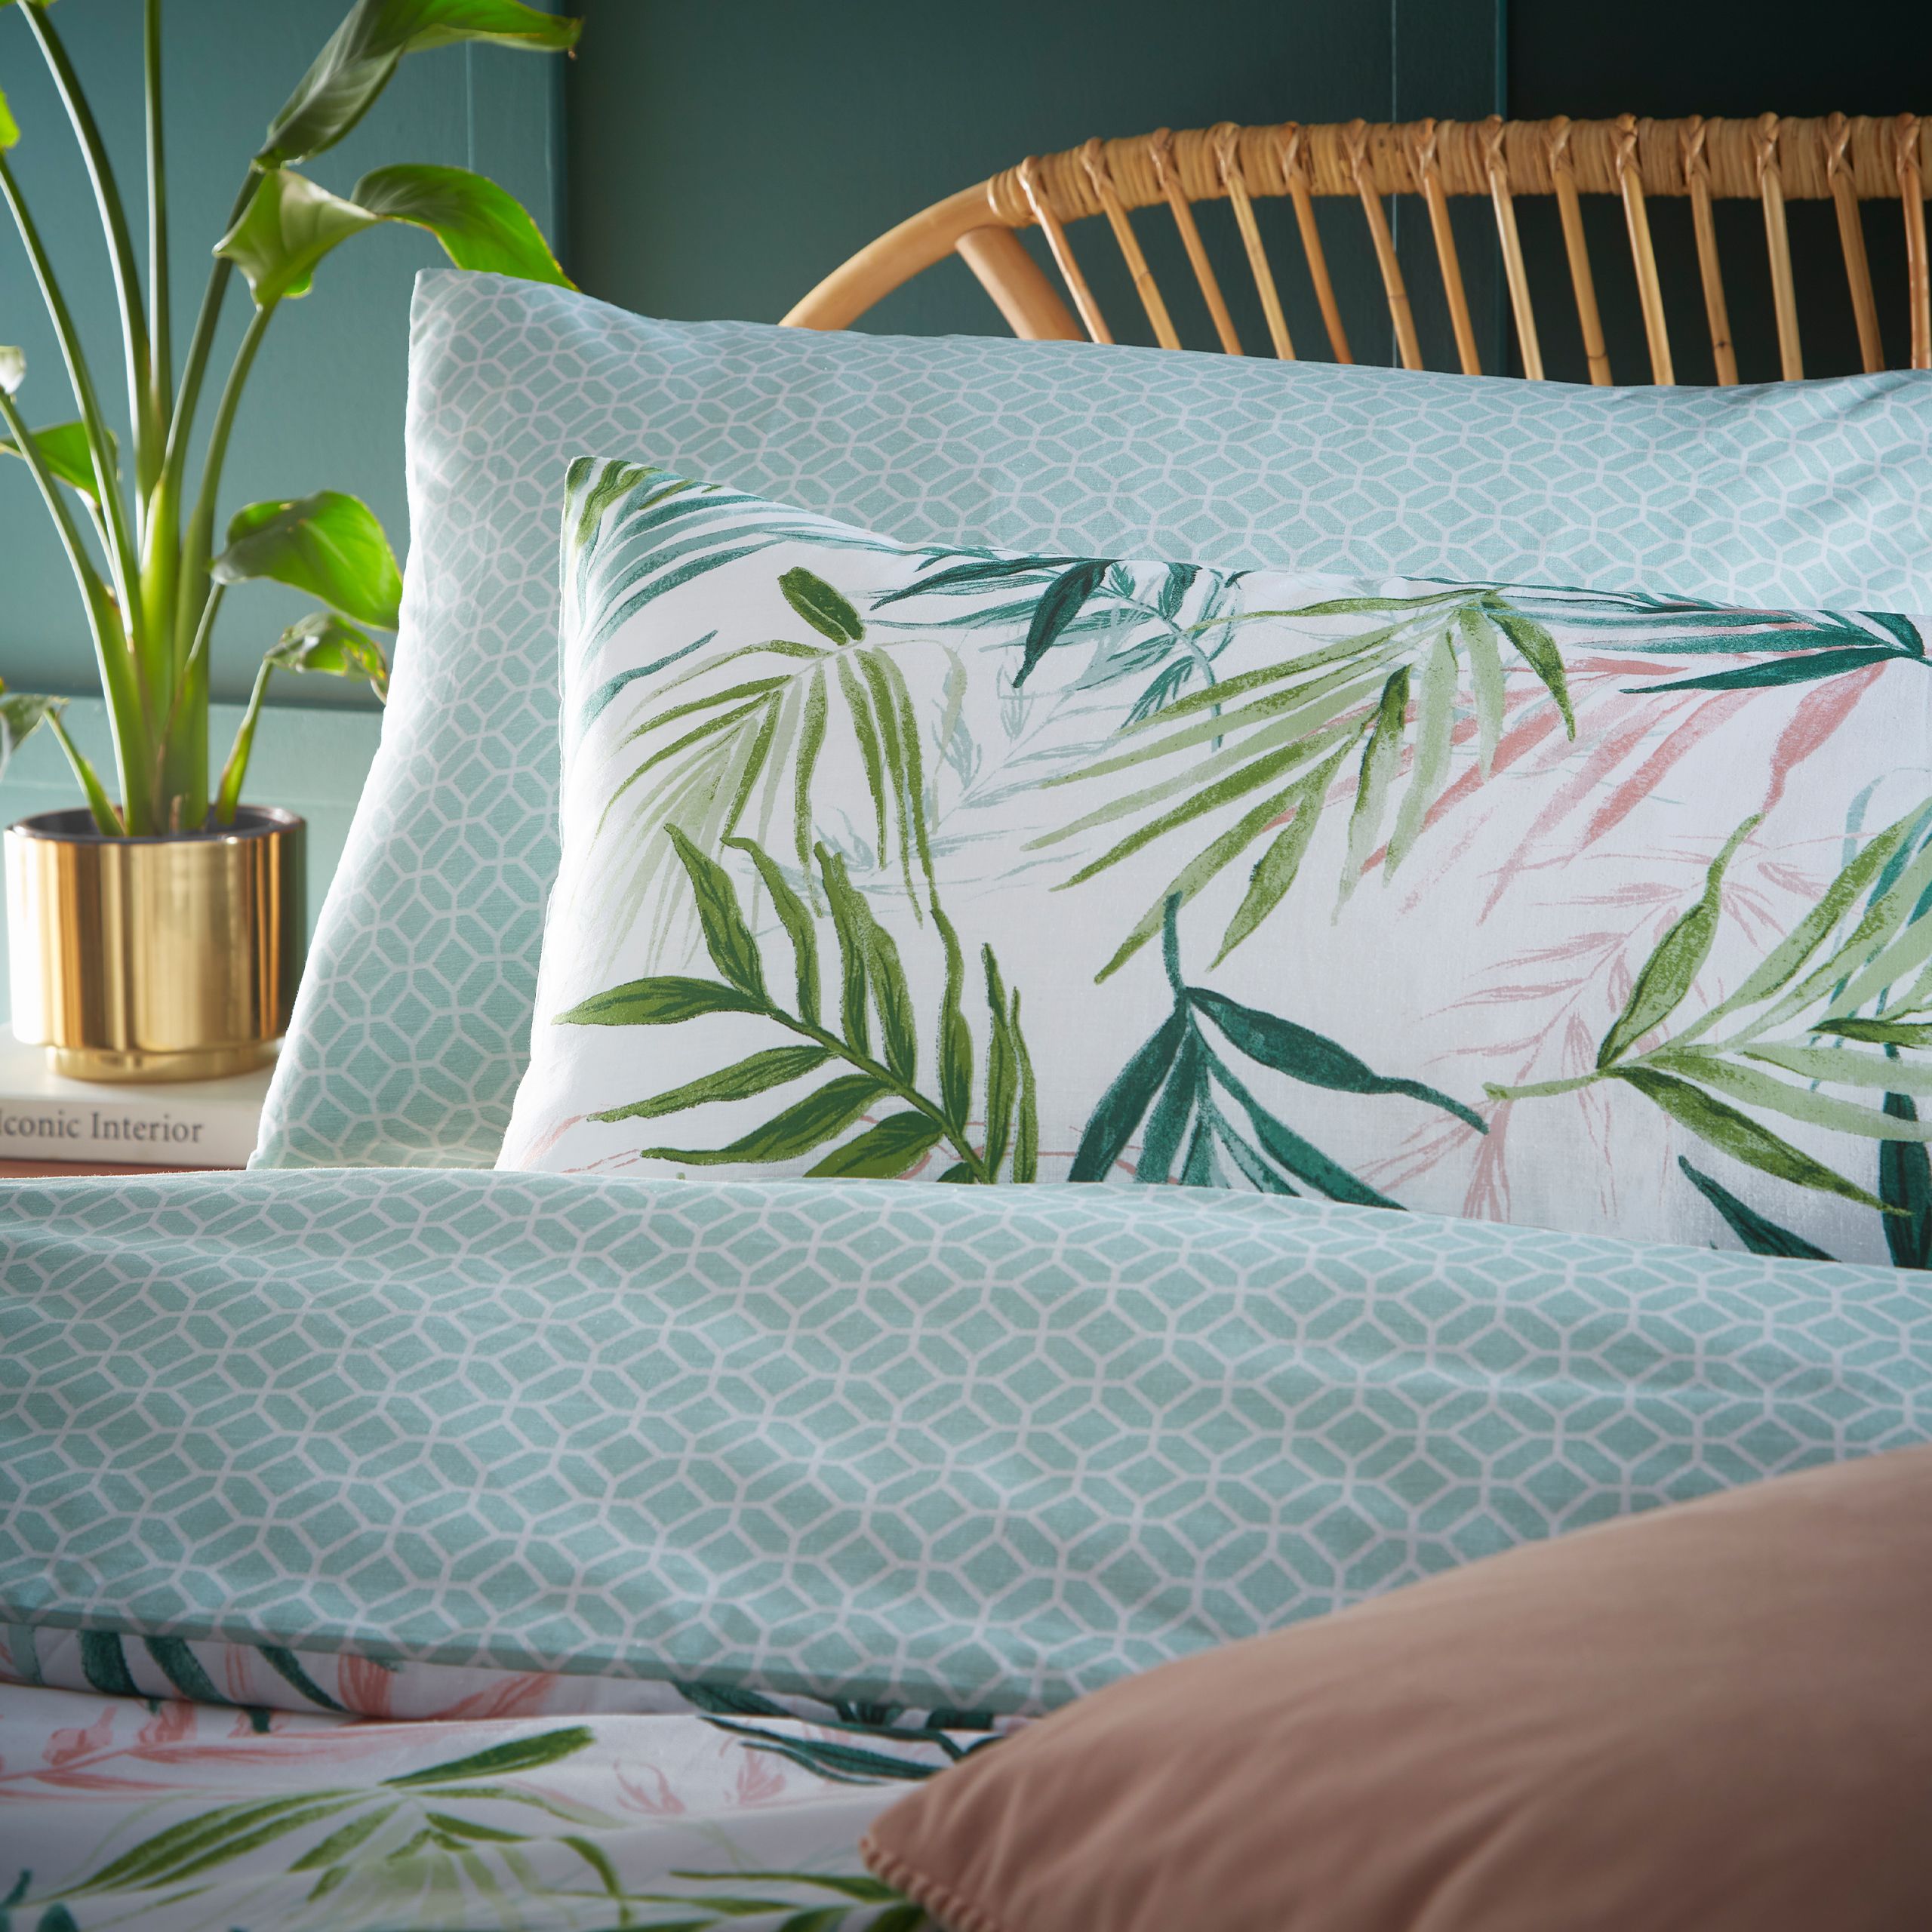 Add an exotic, summery vibe to your bedroom with the Bali Palm reversible duvet cover set featuring swathes of palm leaves in jungle greens and pinks. With a calming geometric print reverse, for a fresh and versatile alternative.